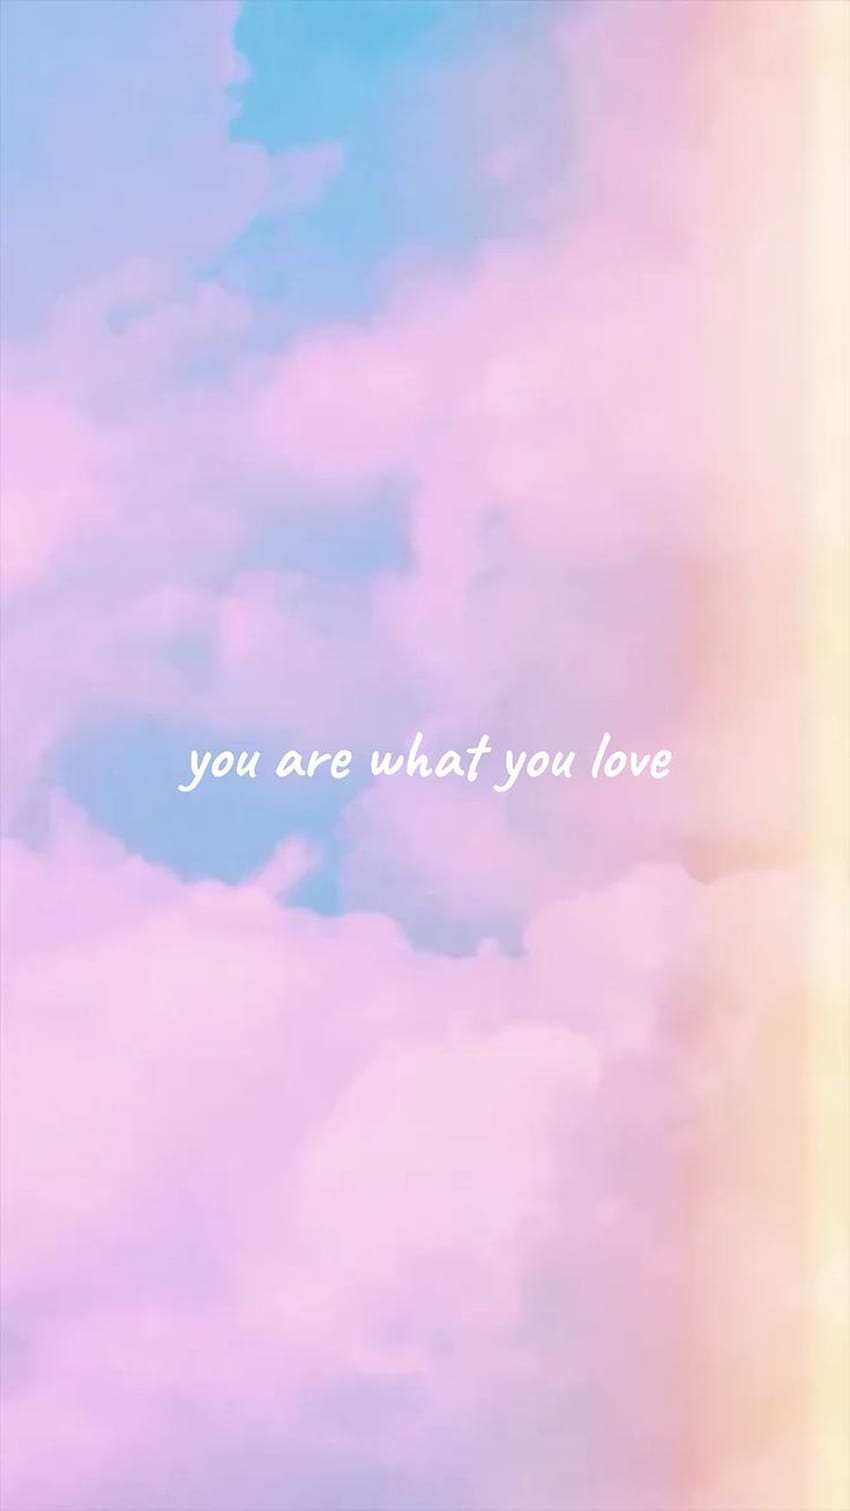 Taylor Swift, Daylight. Taylor swift lyric quotes, Taylor, Lover Taylor Swift HD phone wallpaper